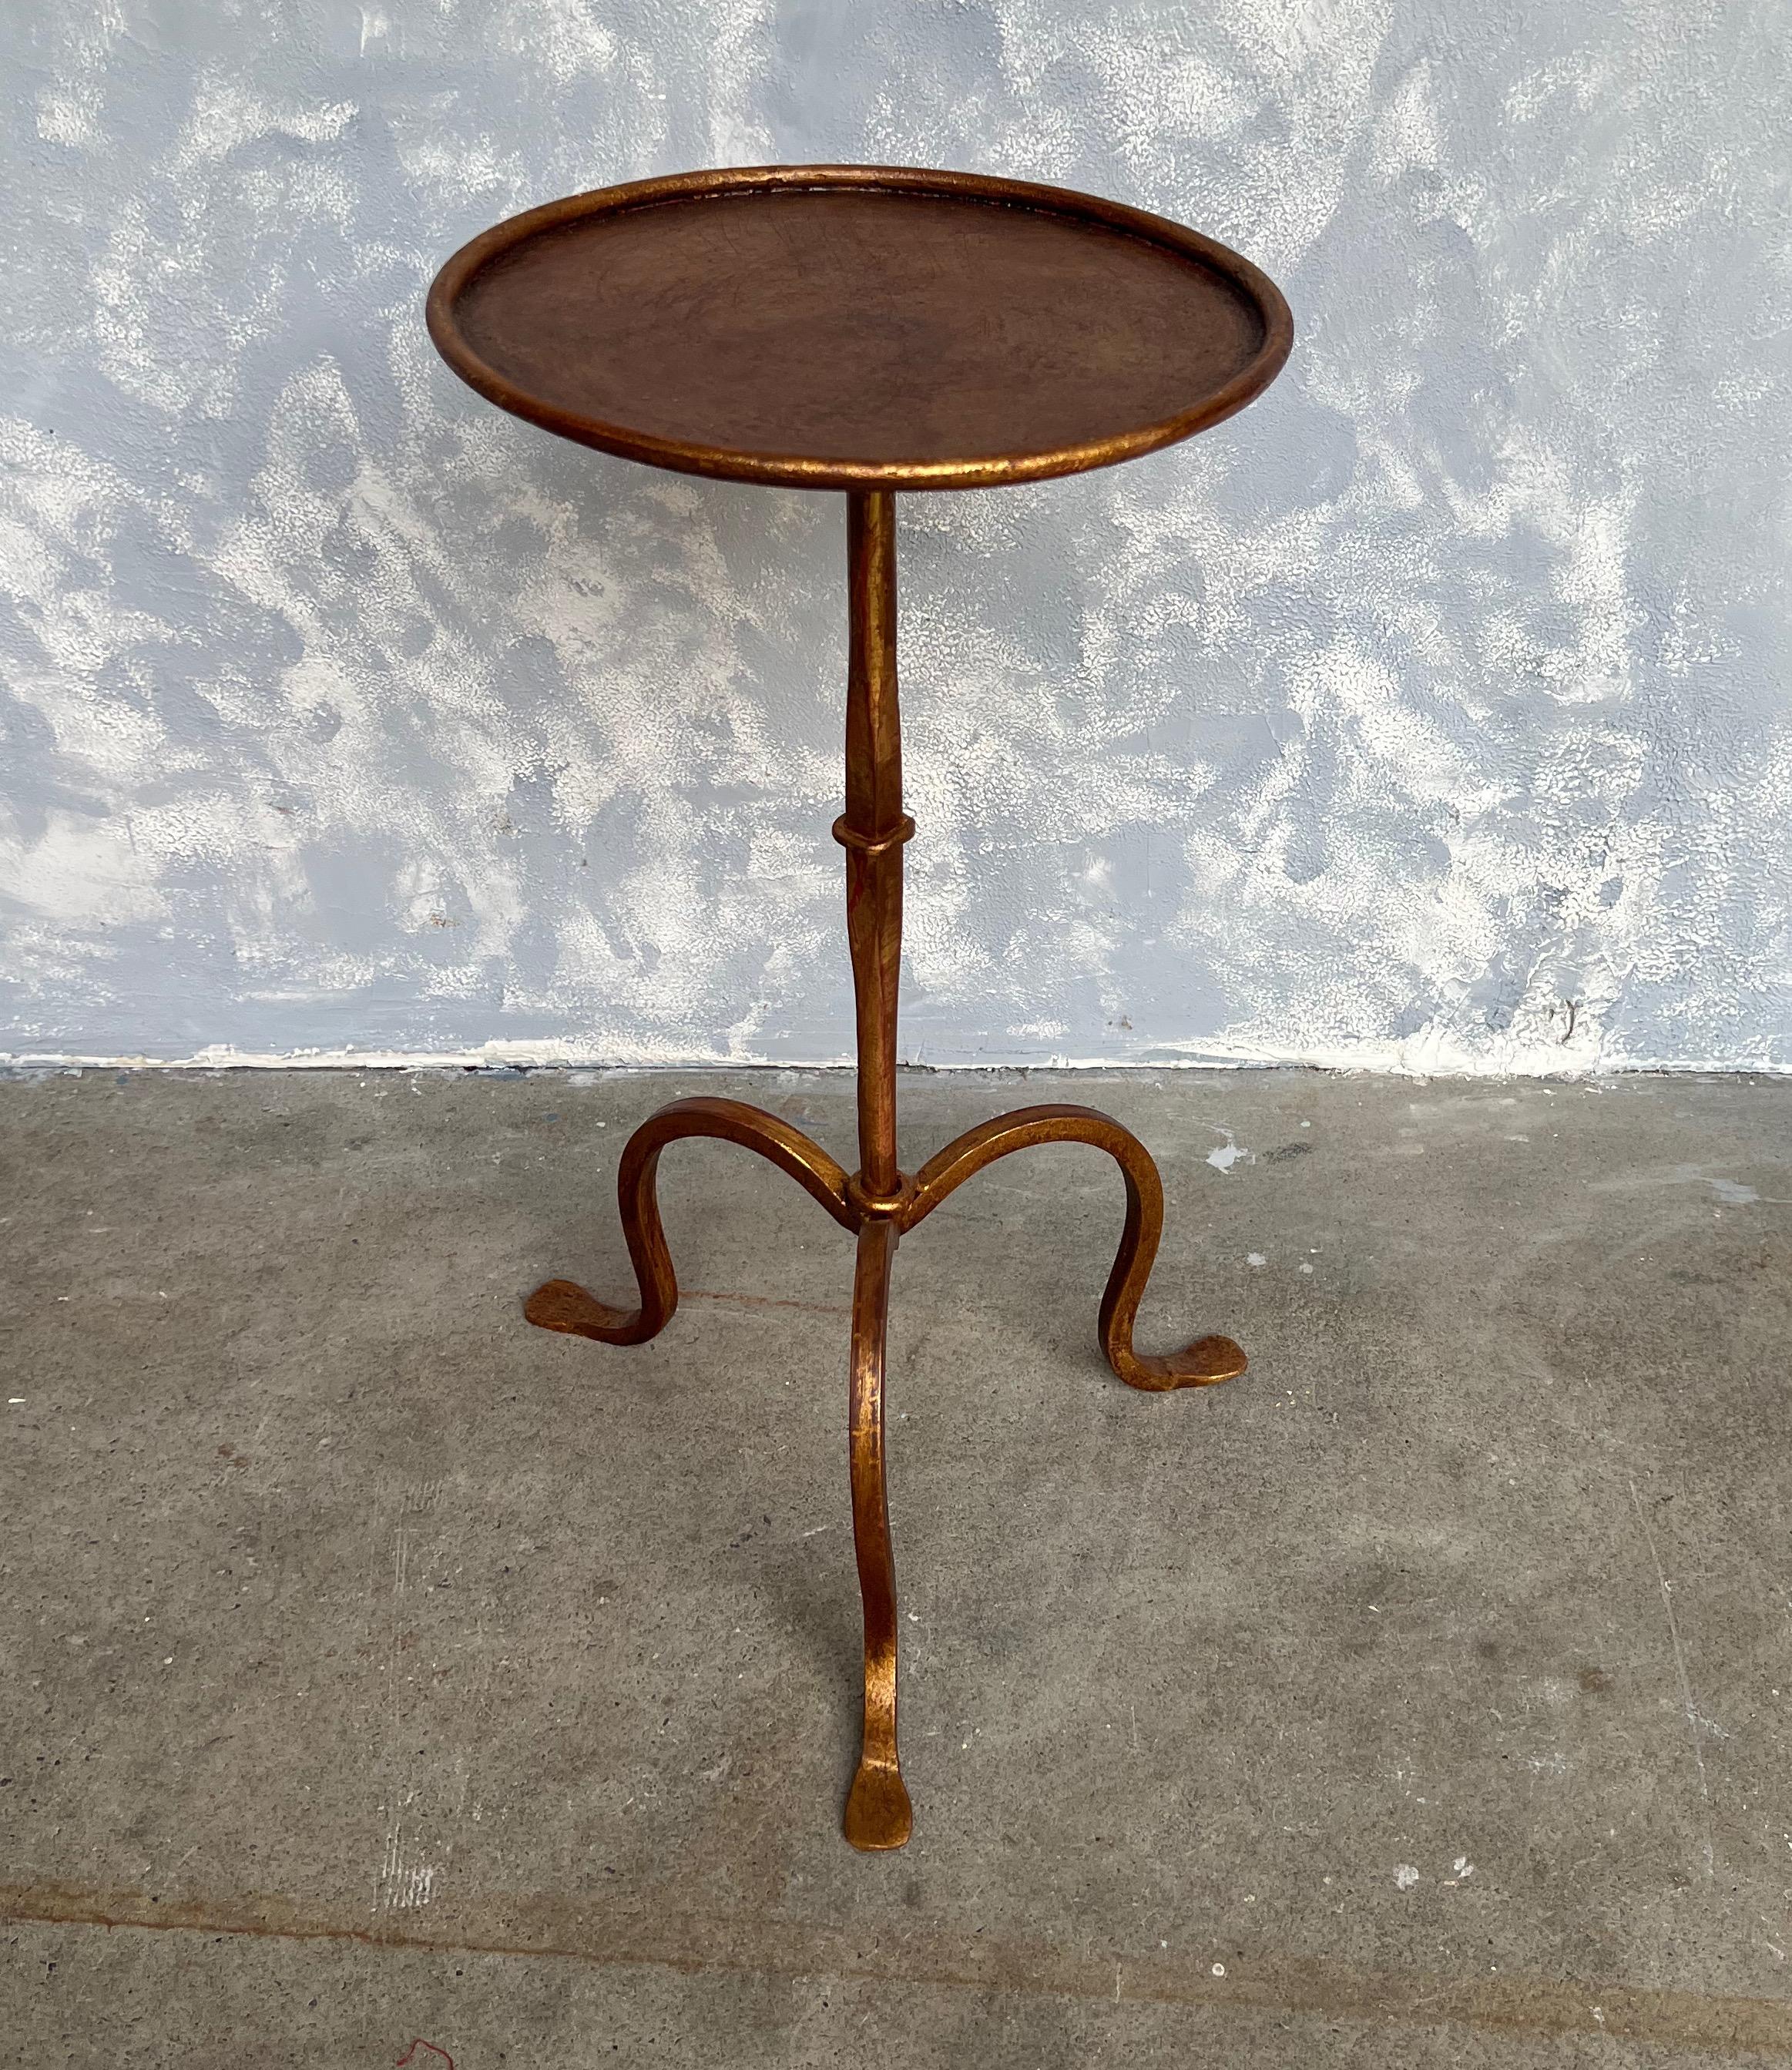 This Spanish 1950s gilt iron drinks table features a unique inverted tapered stem, intersected in the middle by a circular design element. The table sits on an elegant tripod base, and its original finish is a hand-applied gold patina with red